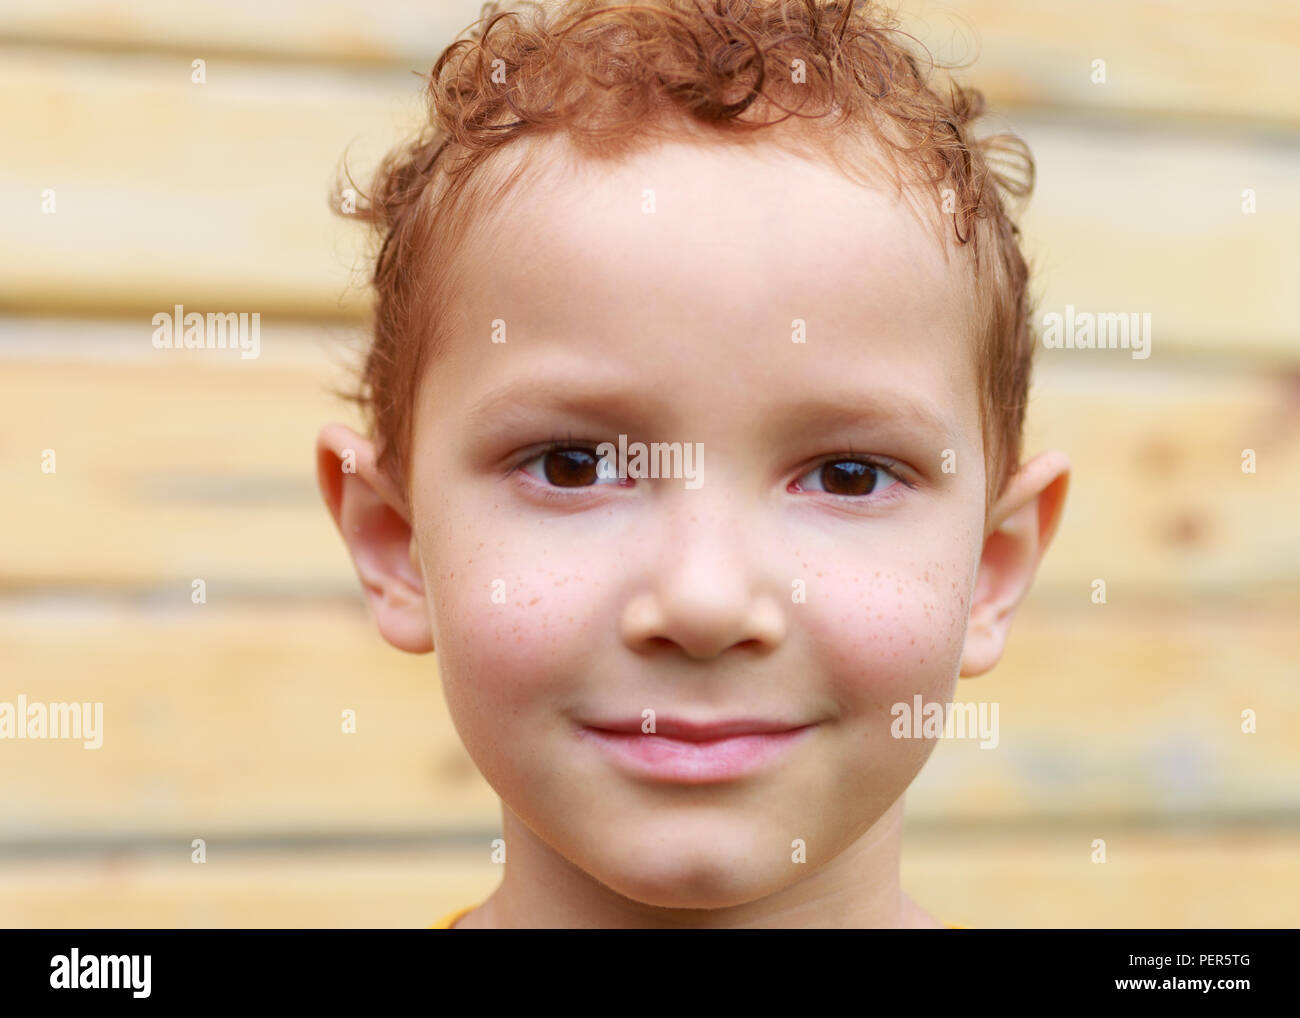 close up portrait of funny redhead boy with freckles Stock Photo